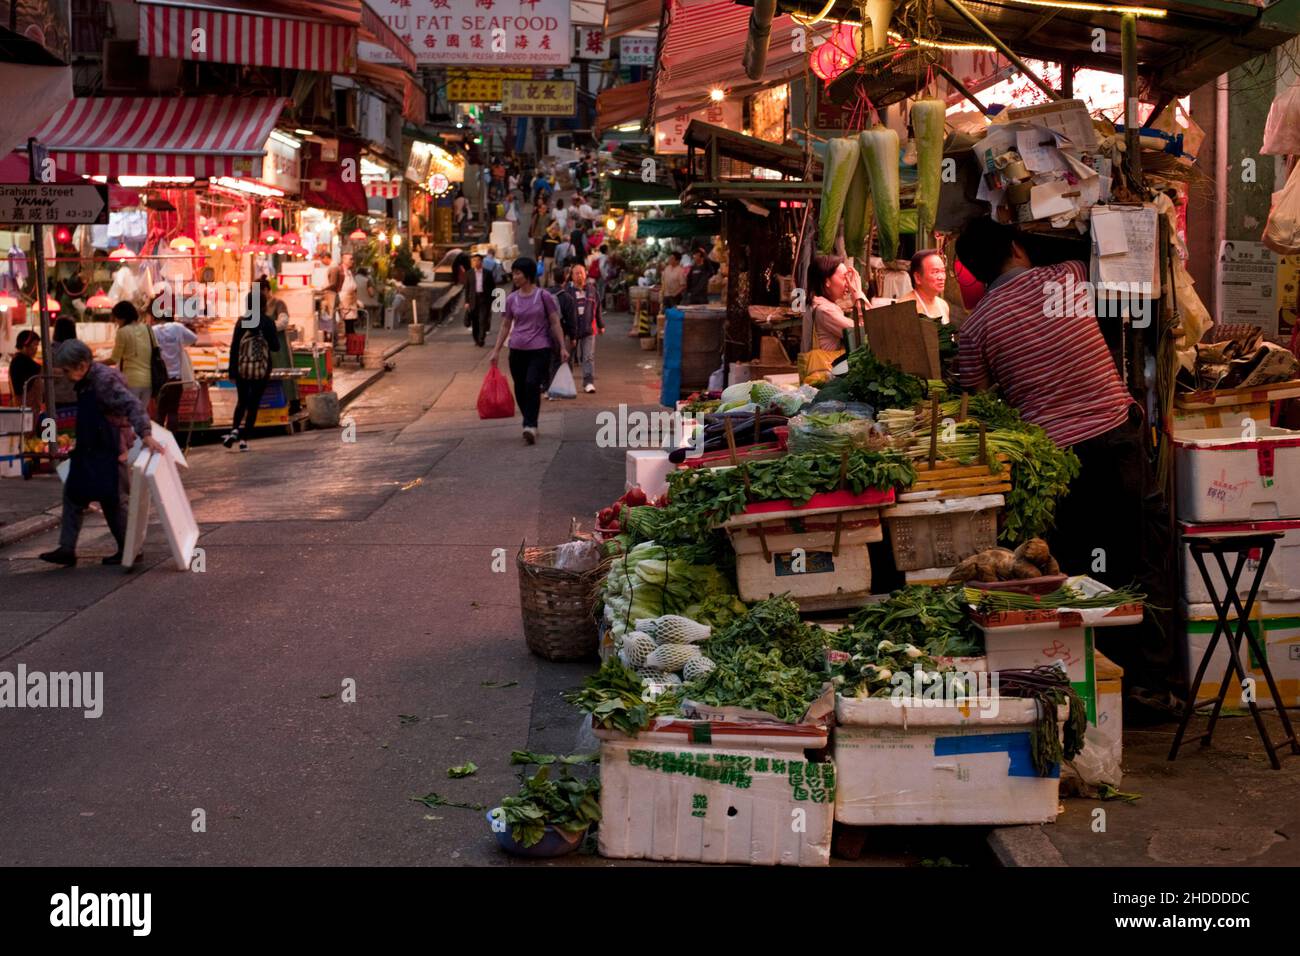 A market street in Hong Kong, with a vegetable stall in the foreground, as evening sets in. Stock Photo